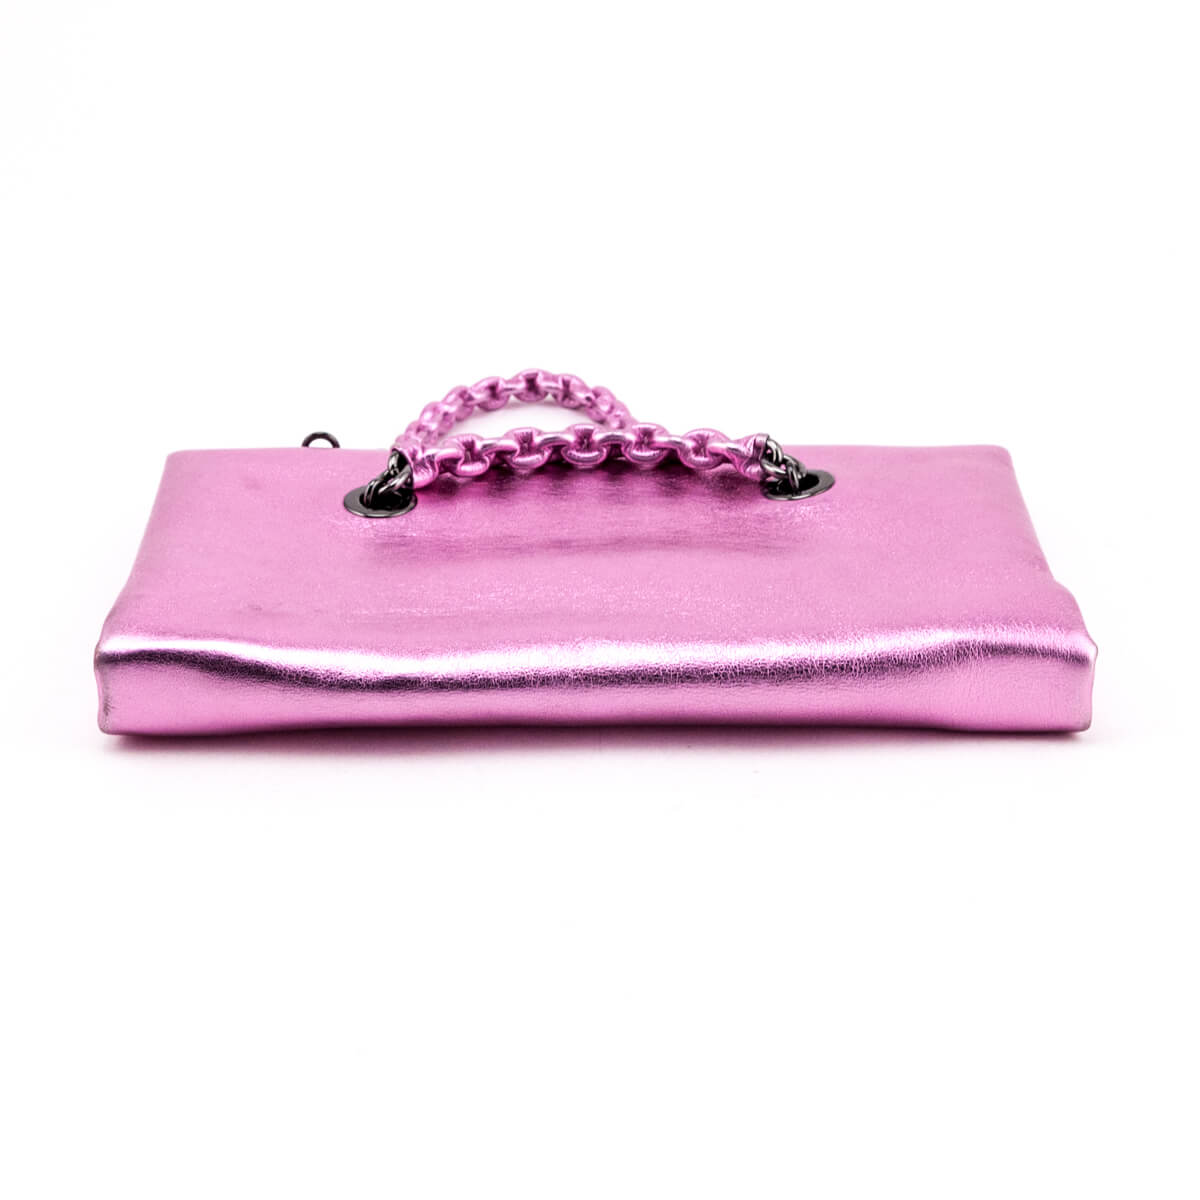 Tom Ford Metallic Pink Chain Convertible Clutch - Love that Bag etc - Preowned Authentic Designer Handbags & Preloved Fashions